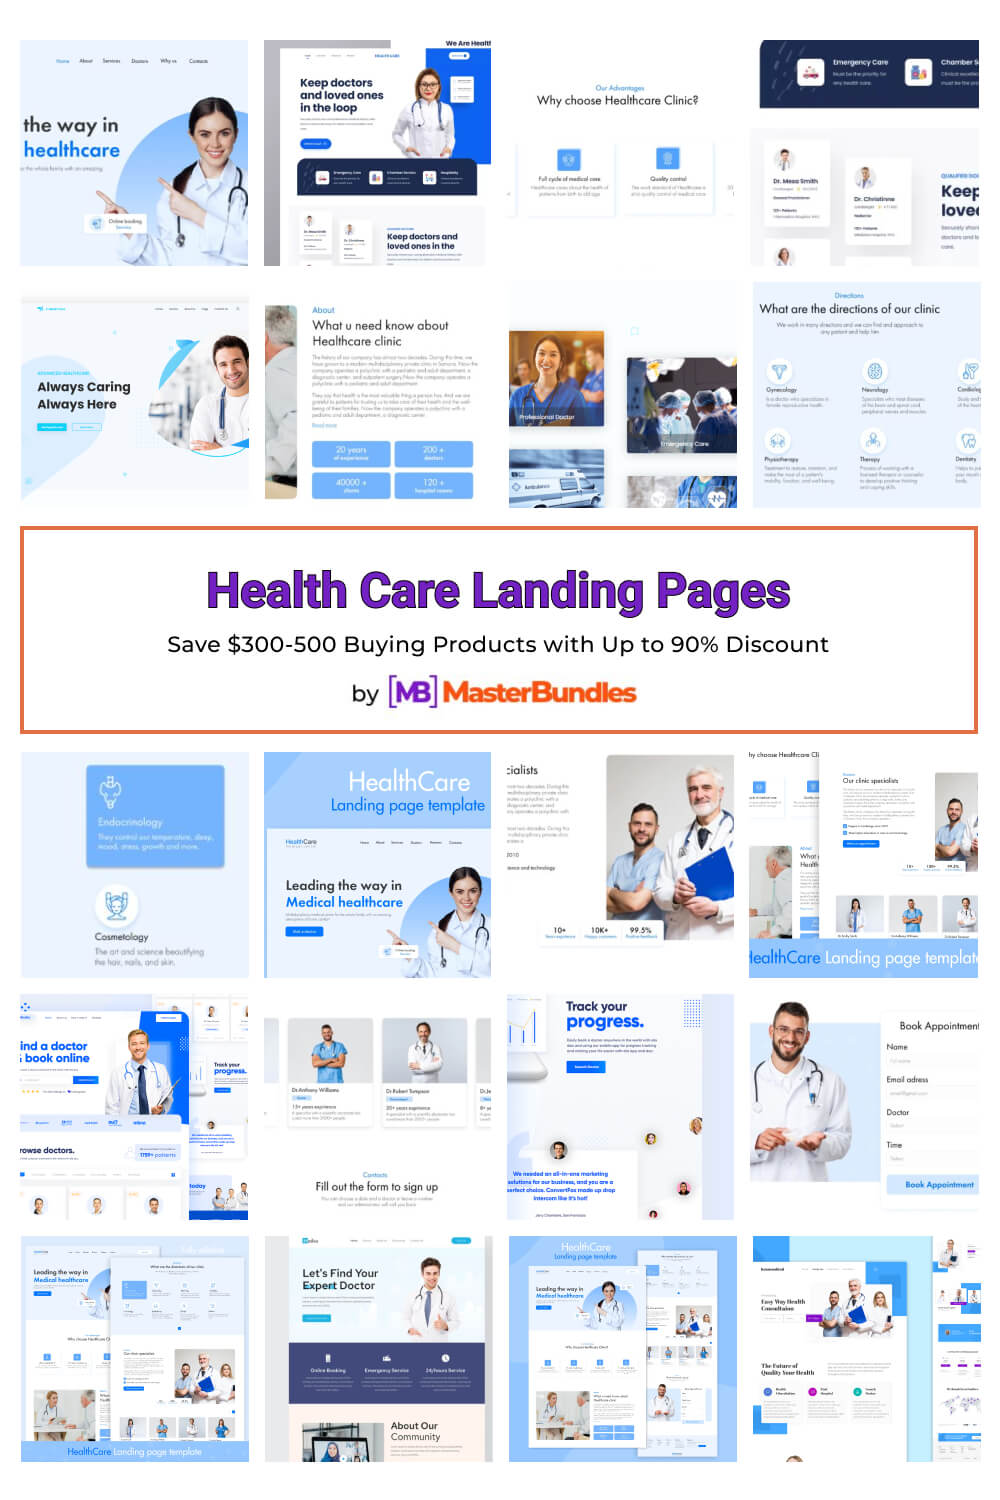 health care landing pages pinterest image.